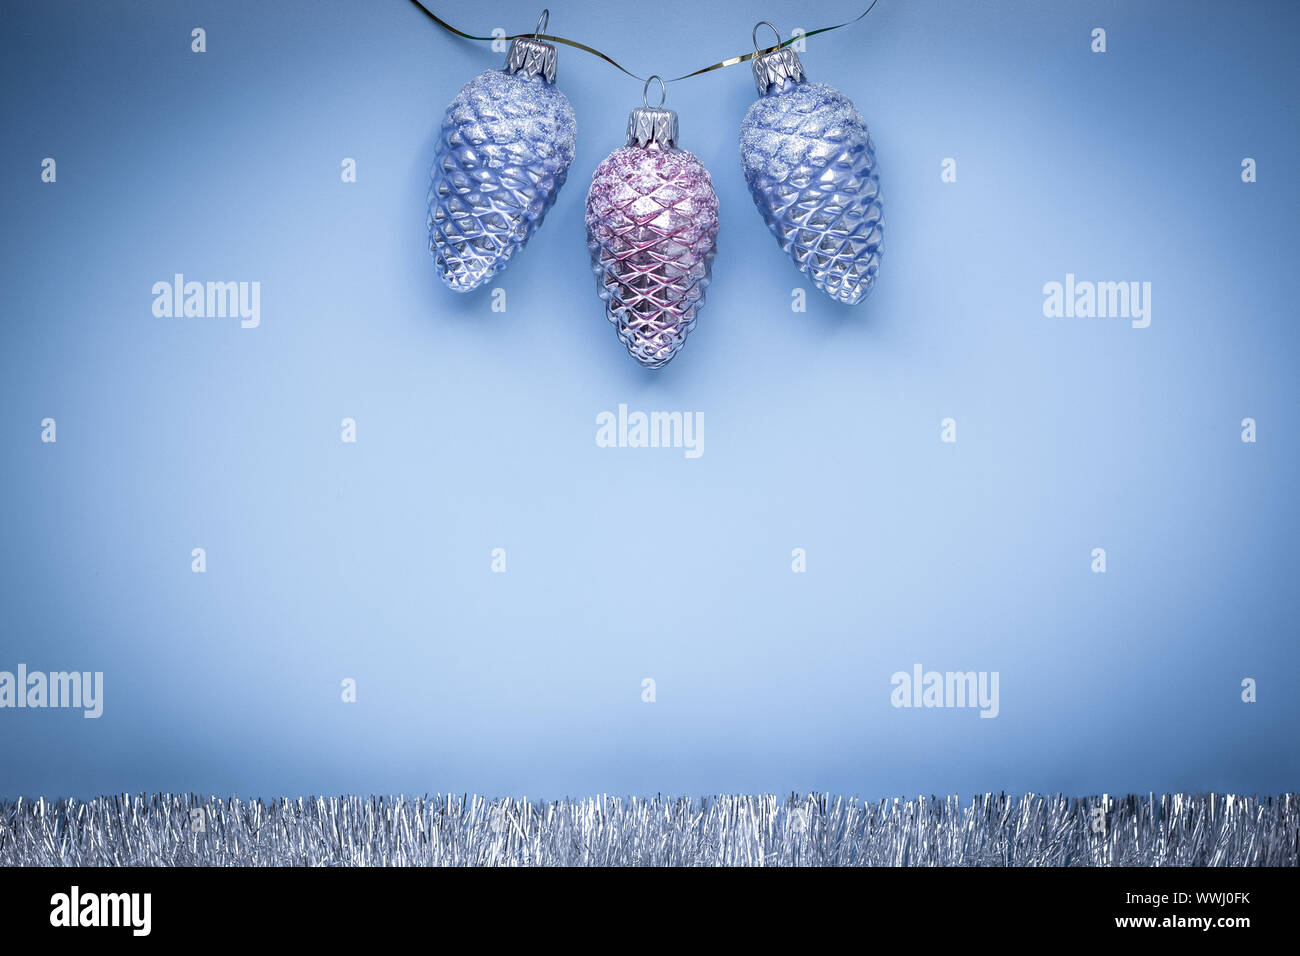 Happy new year greeting card. Text space. Christmas decoration on blue paper background. Festive cones and silver garland. Laconic creative modern des Stock Photo